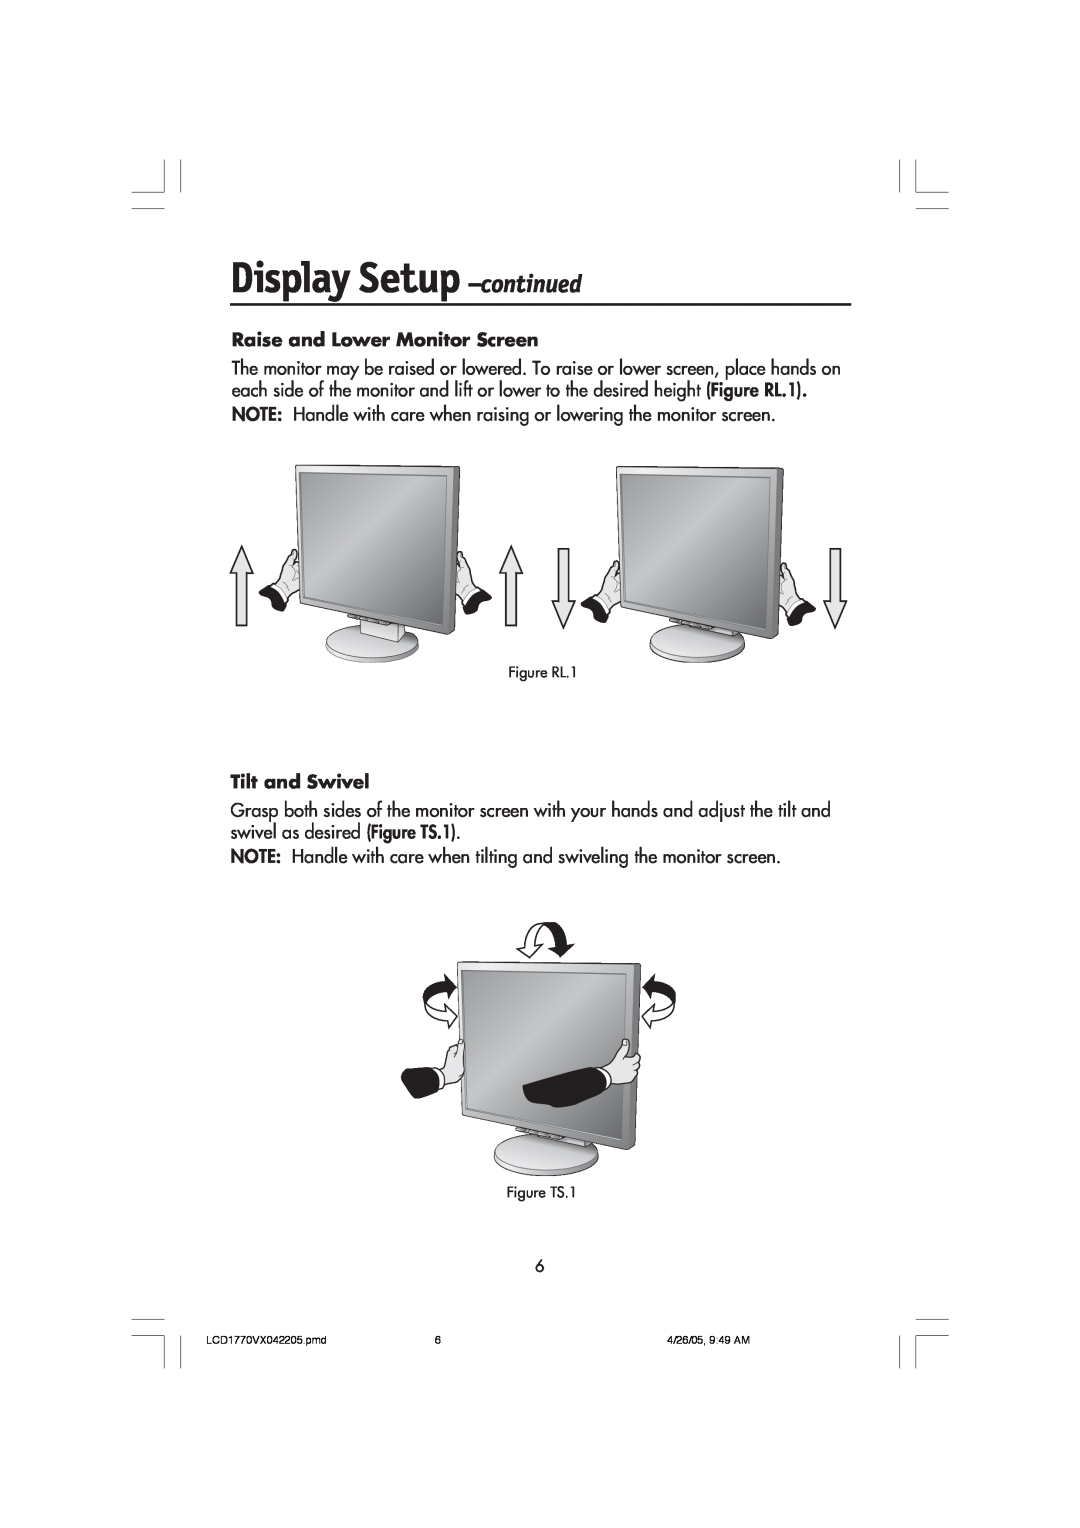 NEC LCD1770VX user manual Raise and Lower Monitor Screen, Tilt and Swivel, Display Setup -continued 